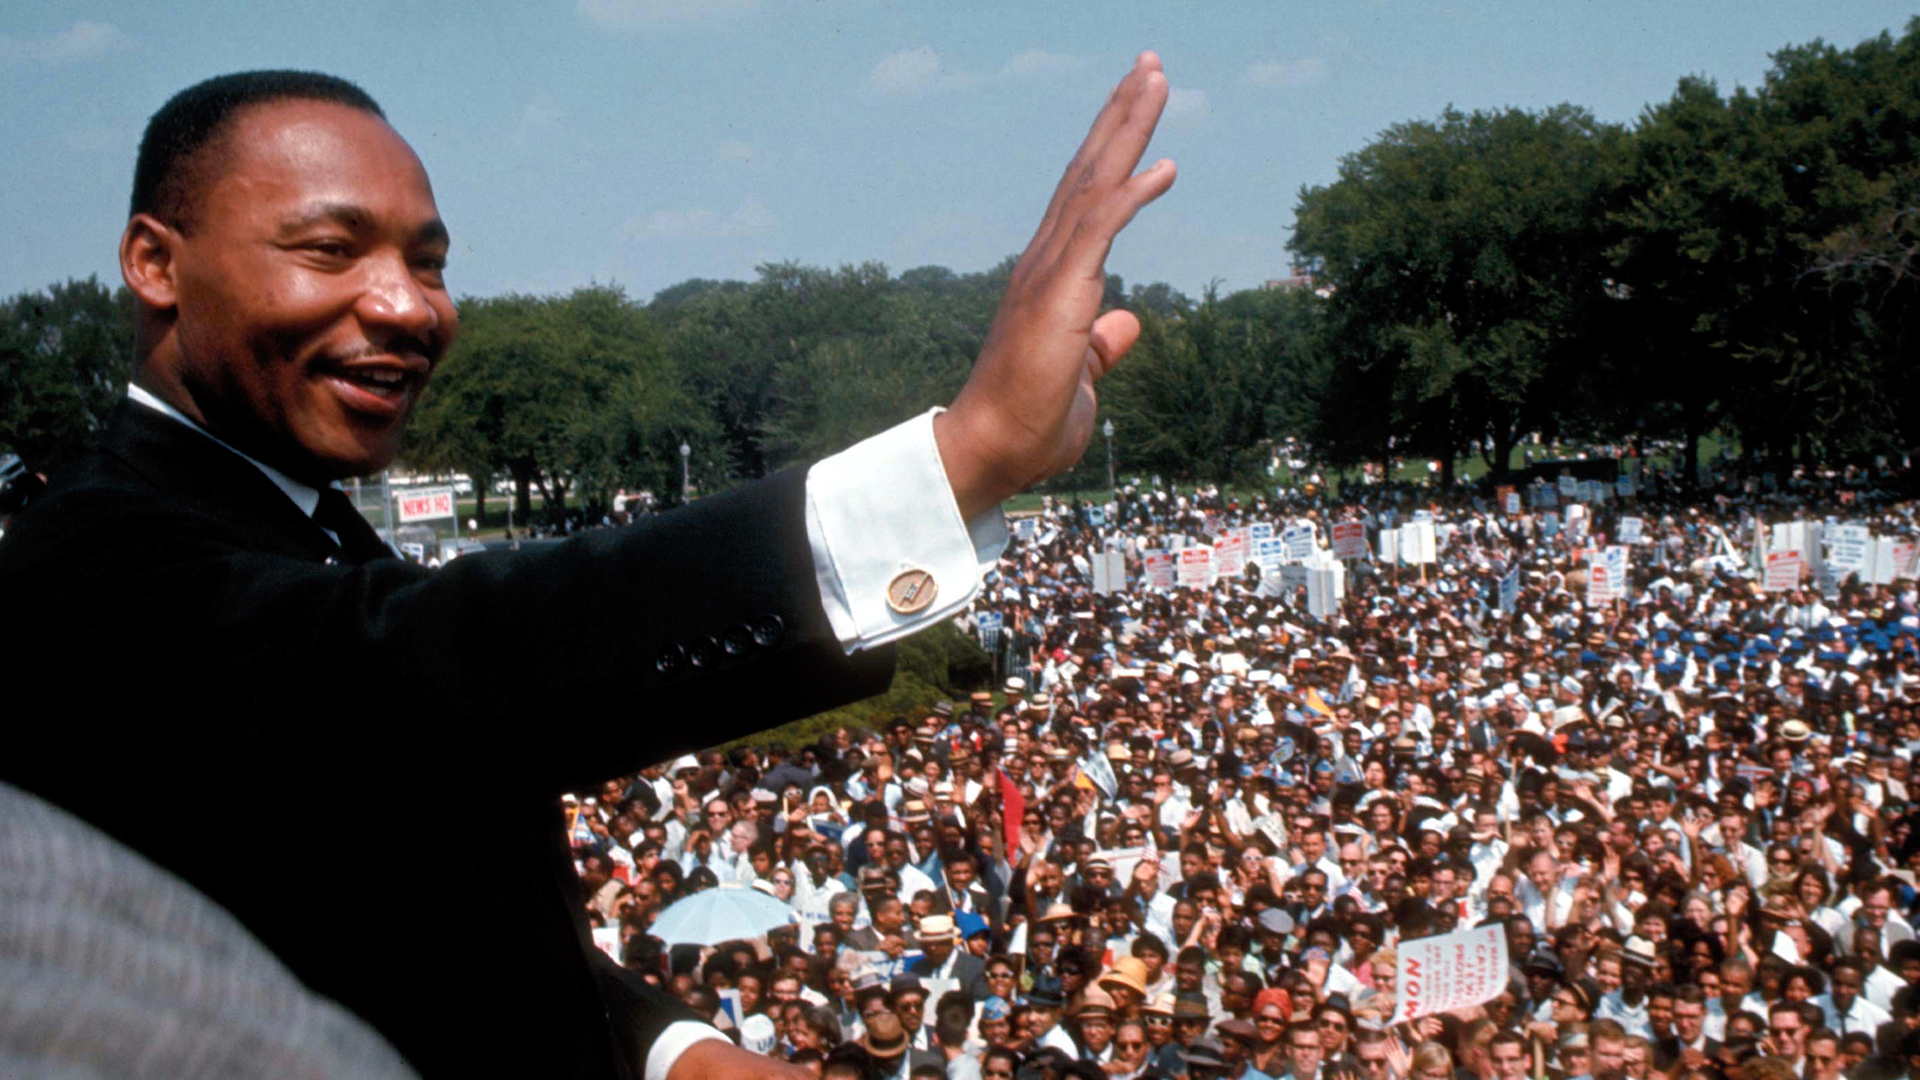 Martin Luther King, Jr. – Call to Activism